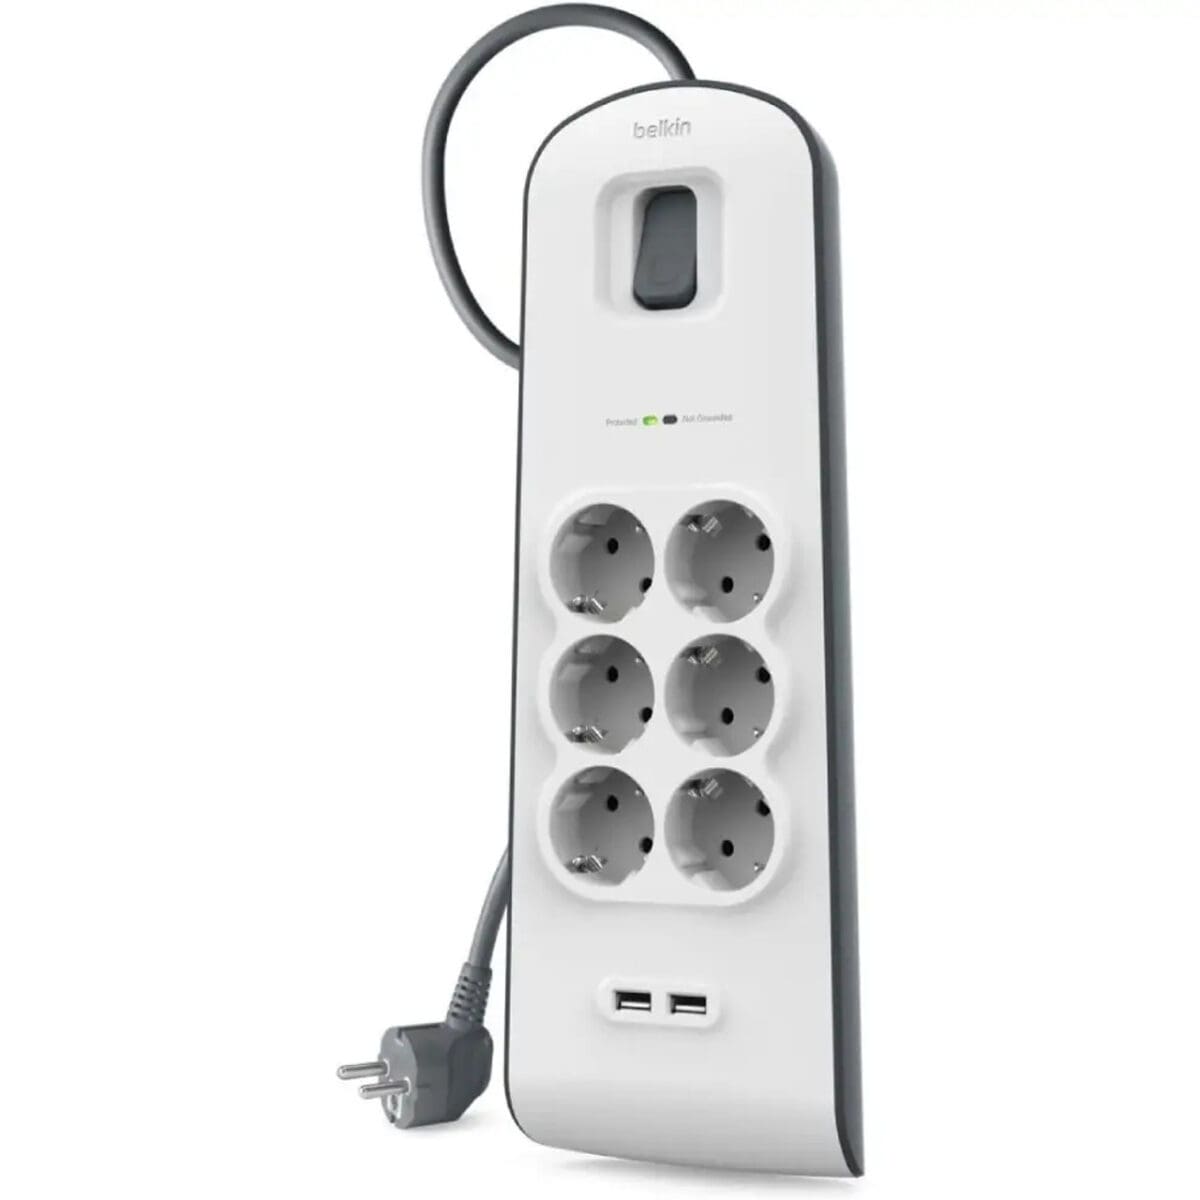 Belkin 2.4A USB Charging 6-outlet Surge Protection Strip (BSV604VF2M)